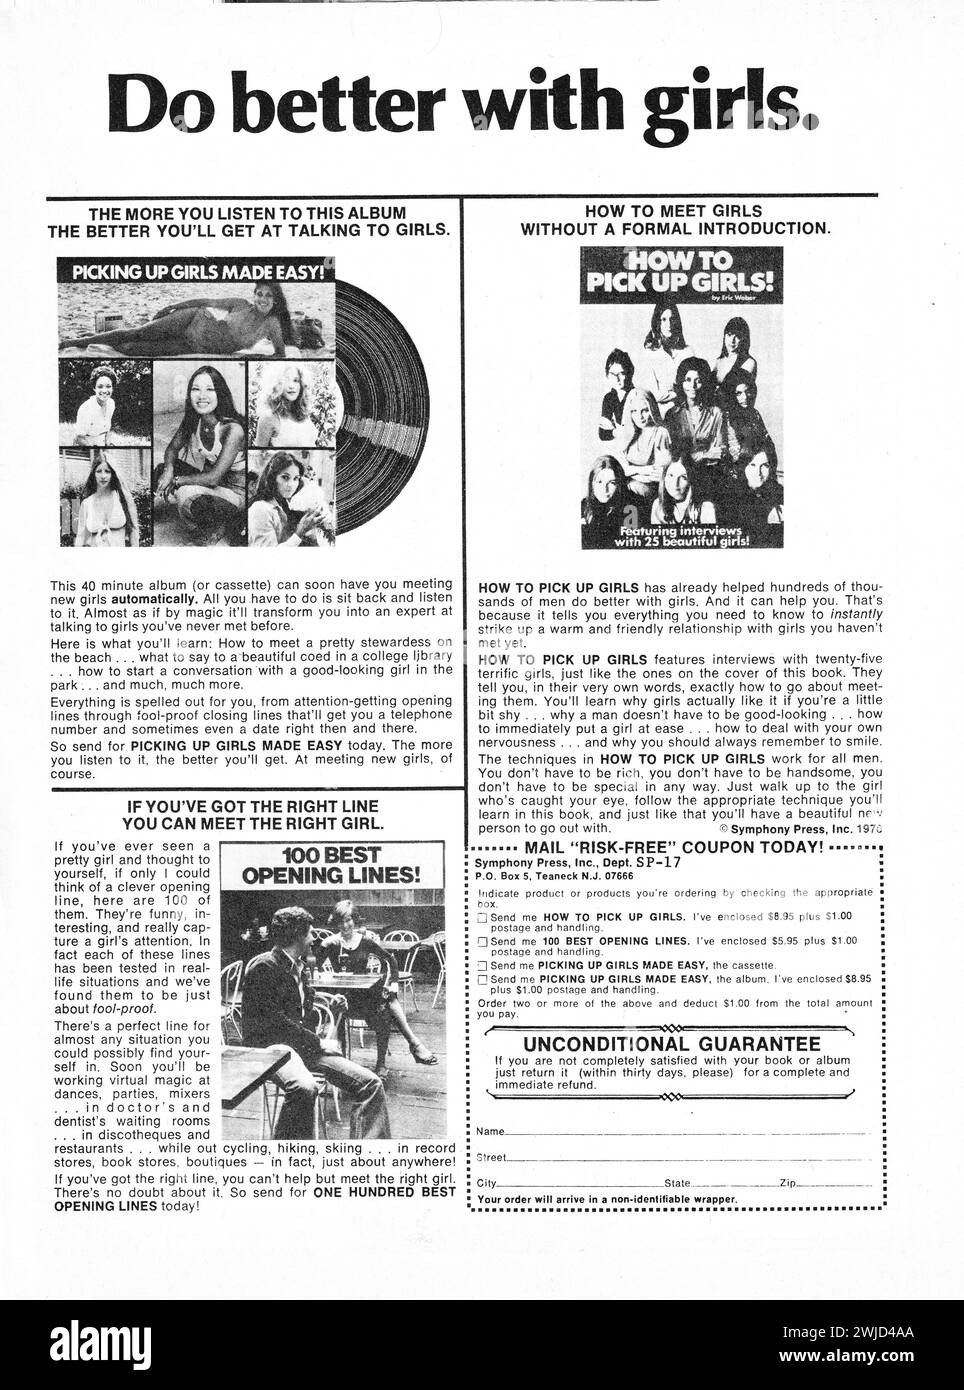 An advertisement in a late 1970s sports magazine selling books and recordings with instructions on how to do better with girls. Comes with an unconditional guarantee. Stock Photo